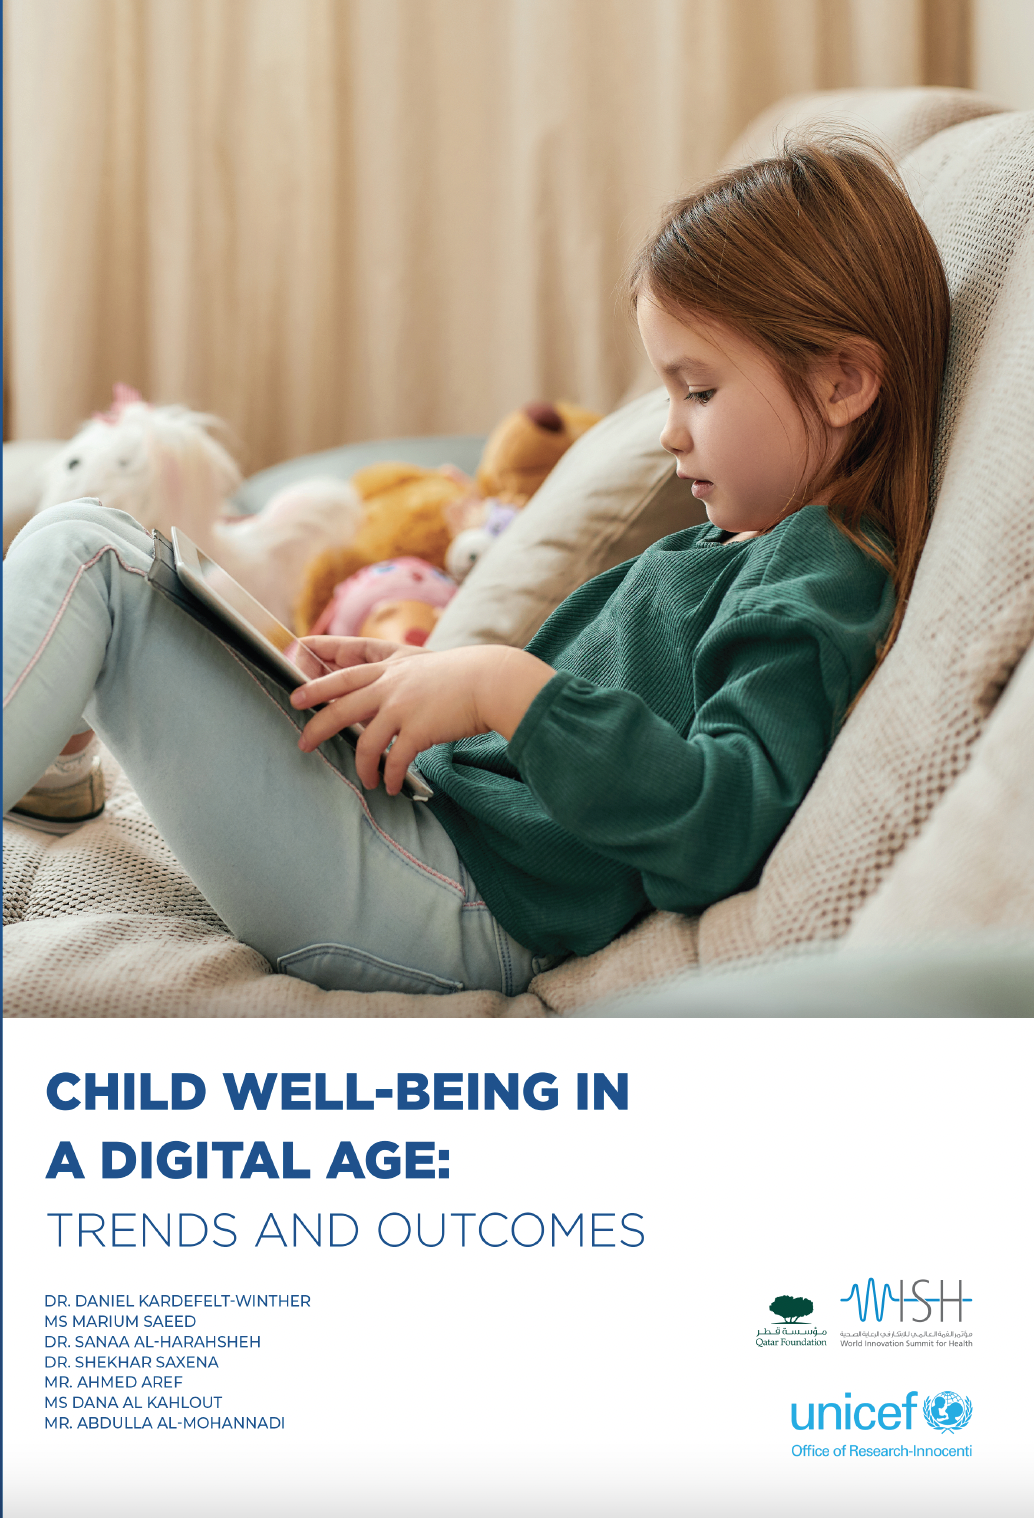 Child wellbeing in a digital age